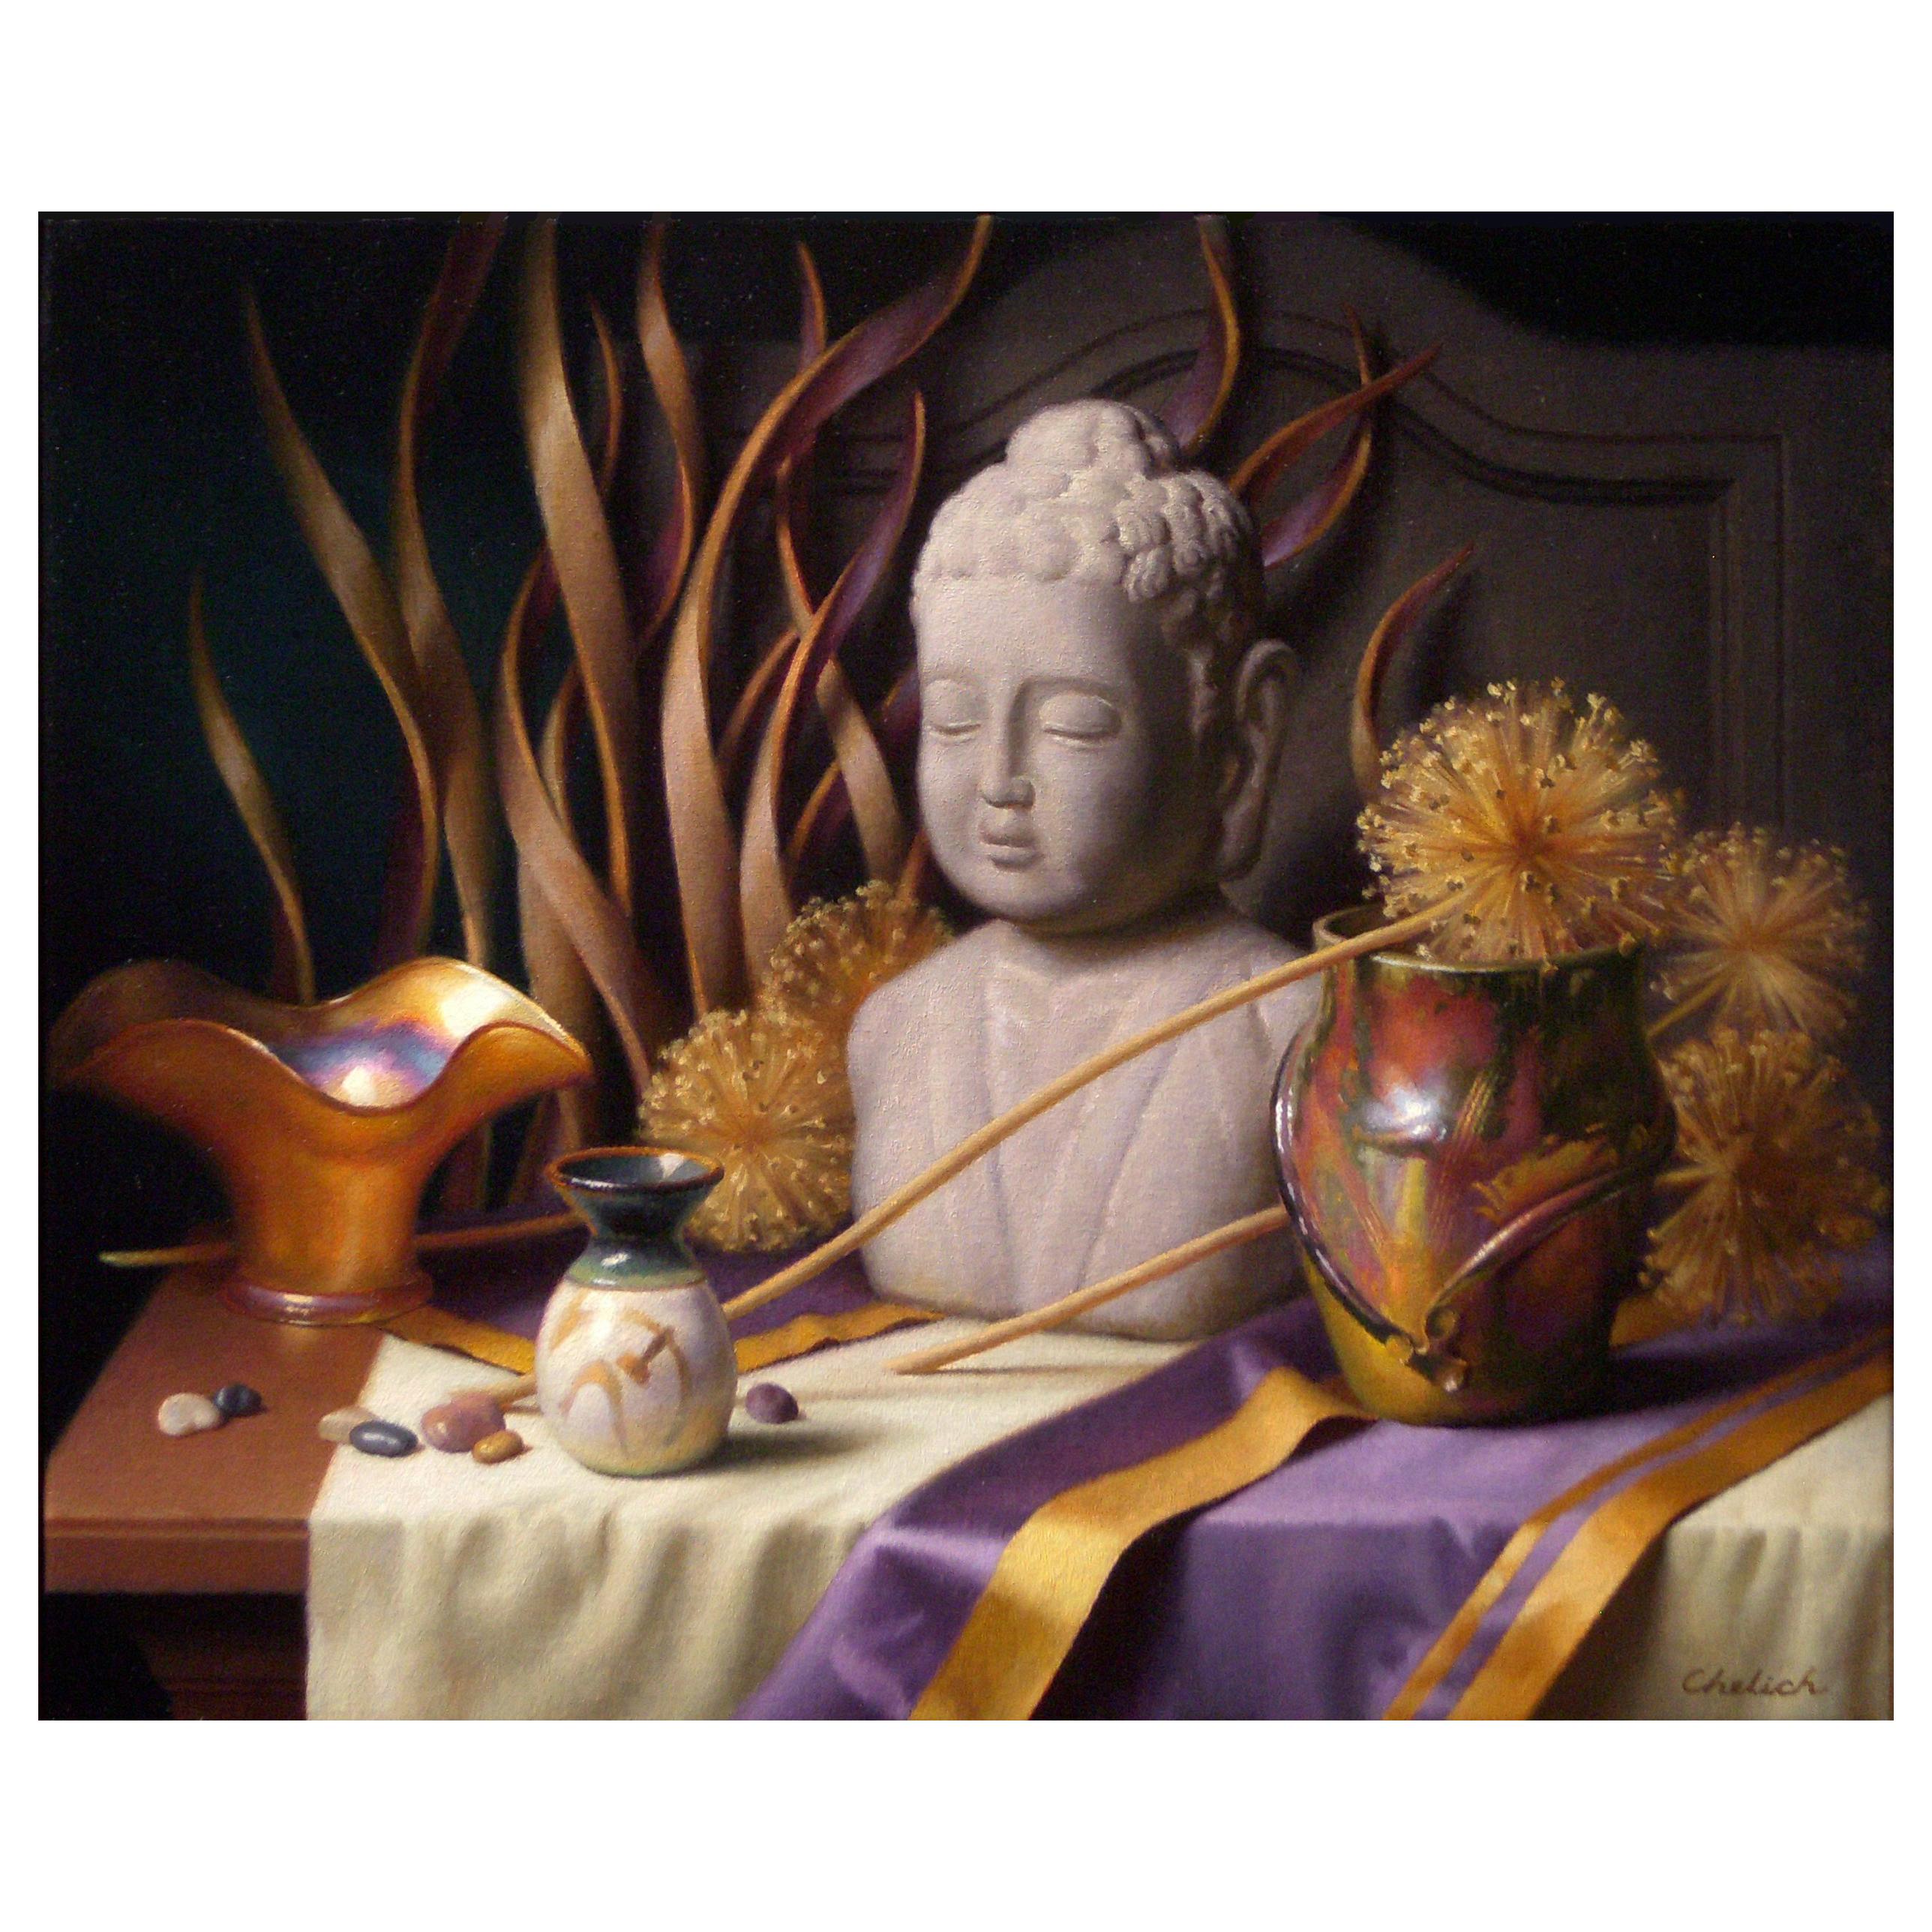 Still Life with Buddha, Original Oil Painting on Canvas by Michael Chelich